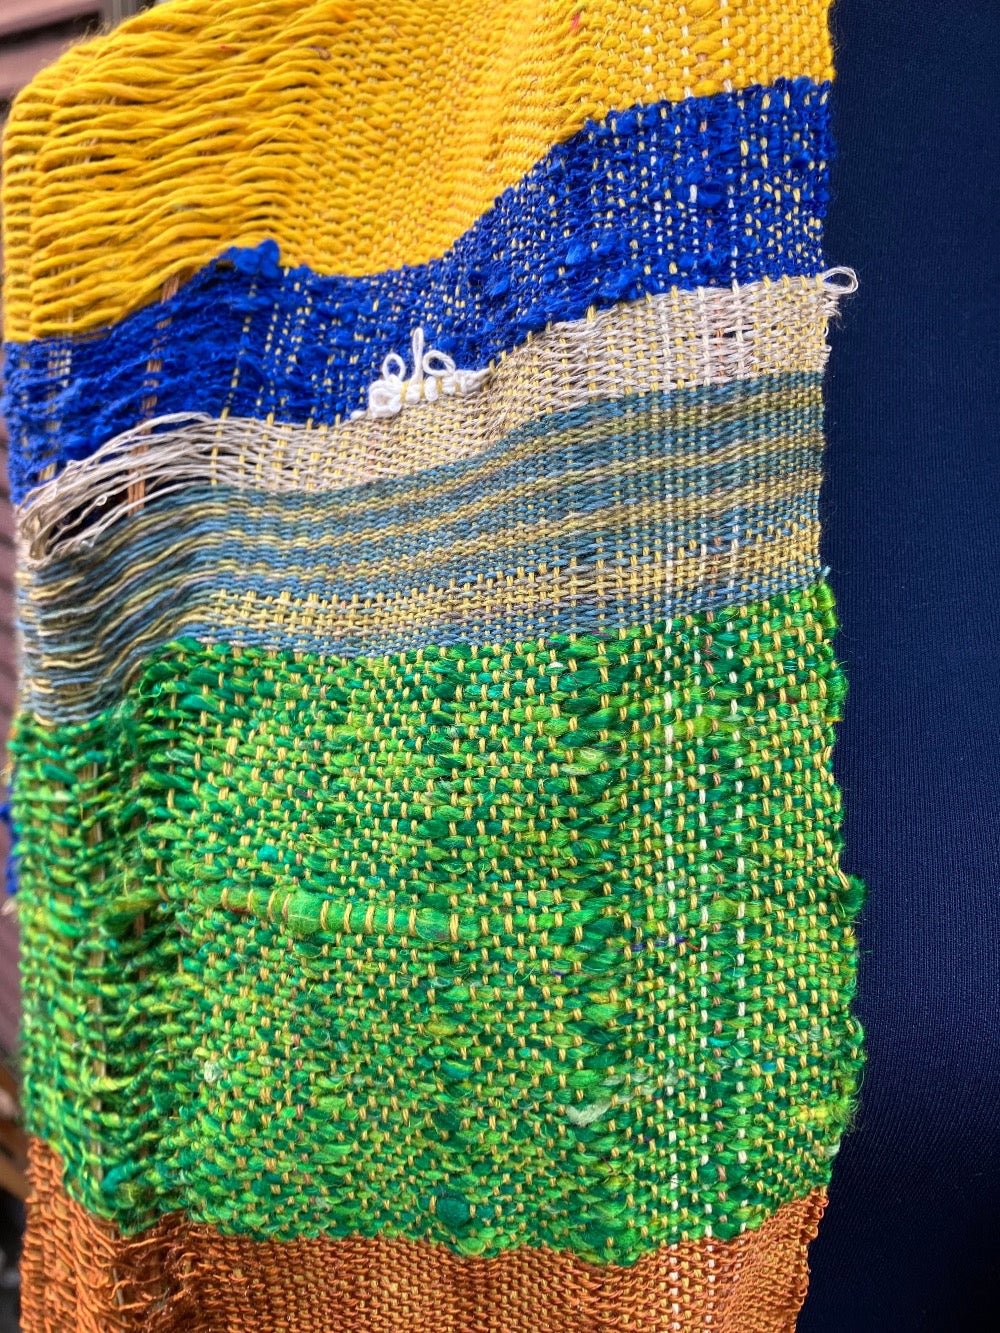 Vivid blue, yellow, copper, and green scarf on blue mannequin